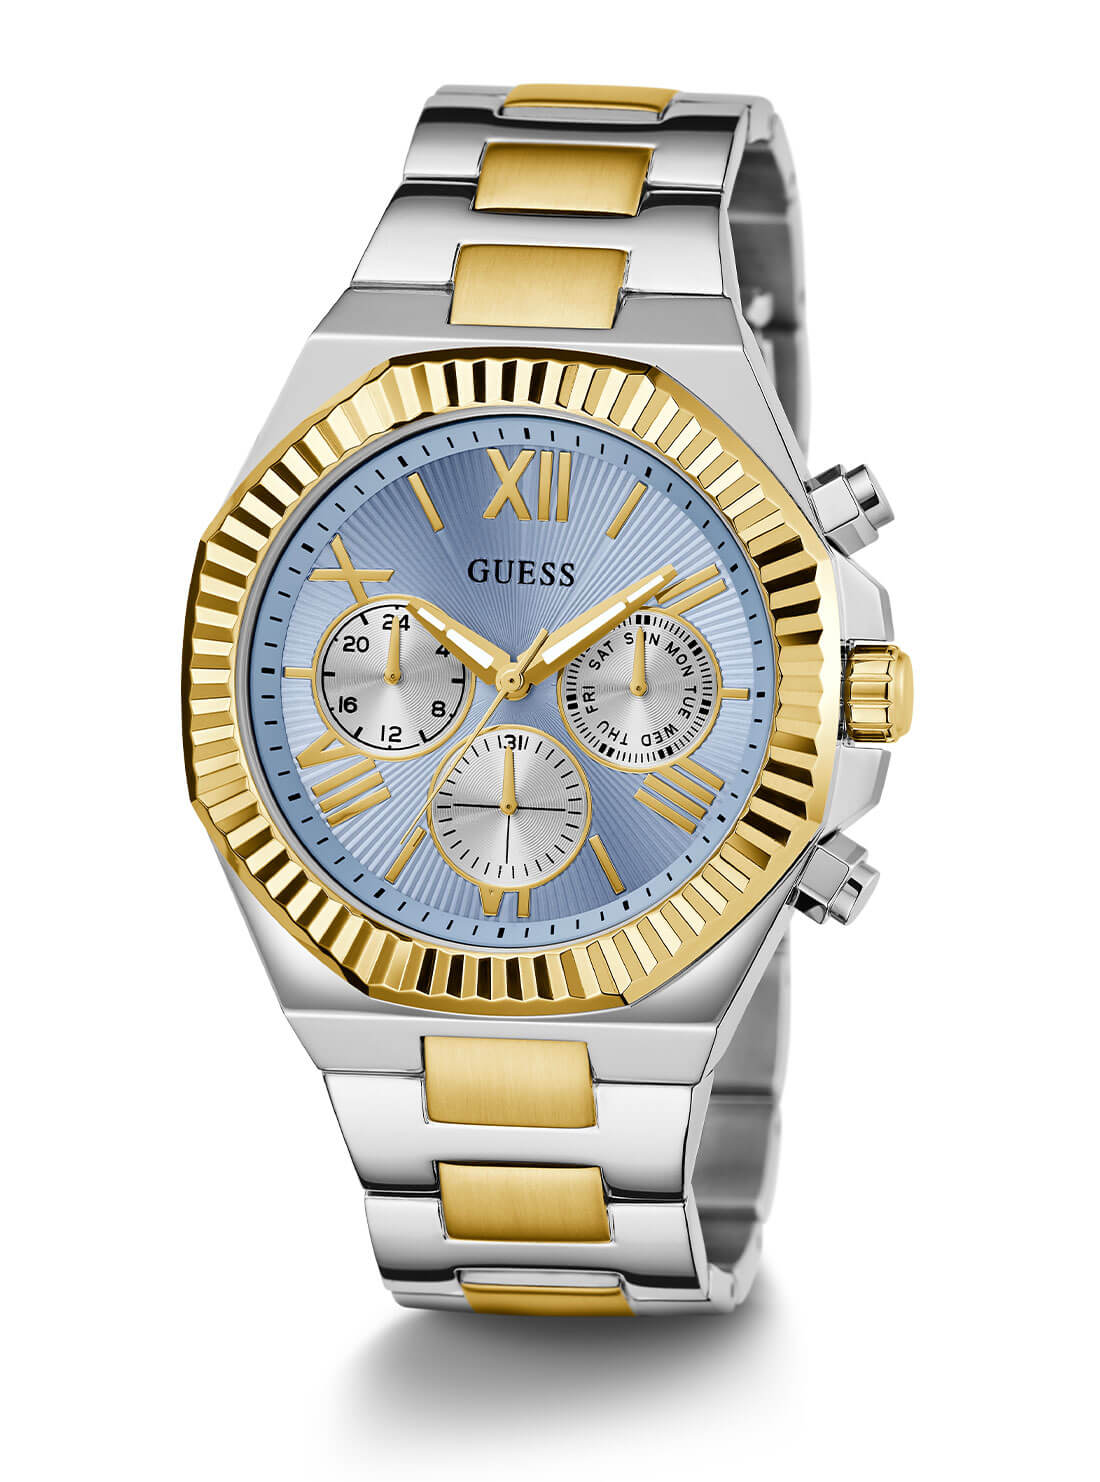 Silver and Gold Equity Blue Link Watch | GUESS Men's watches | full view